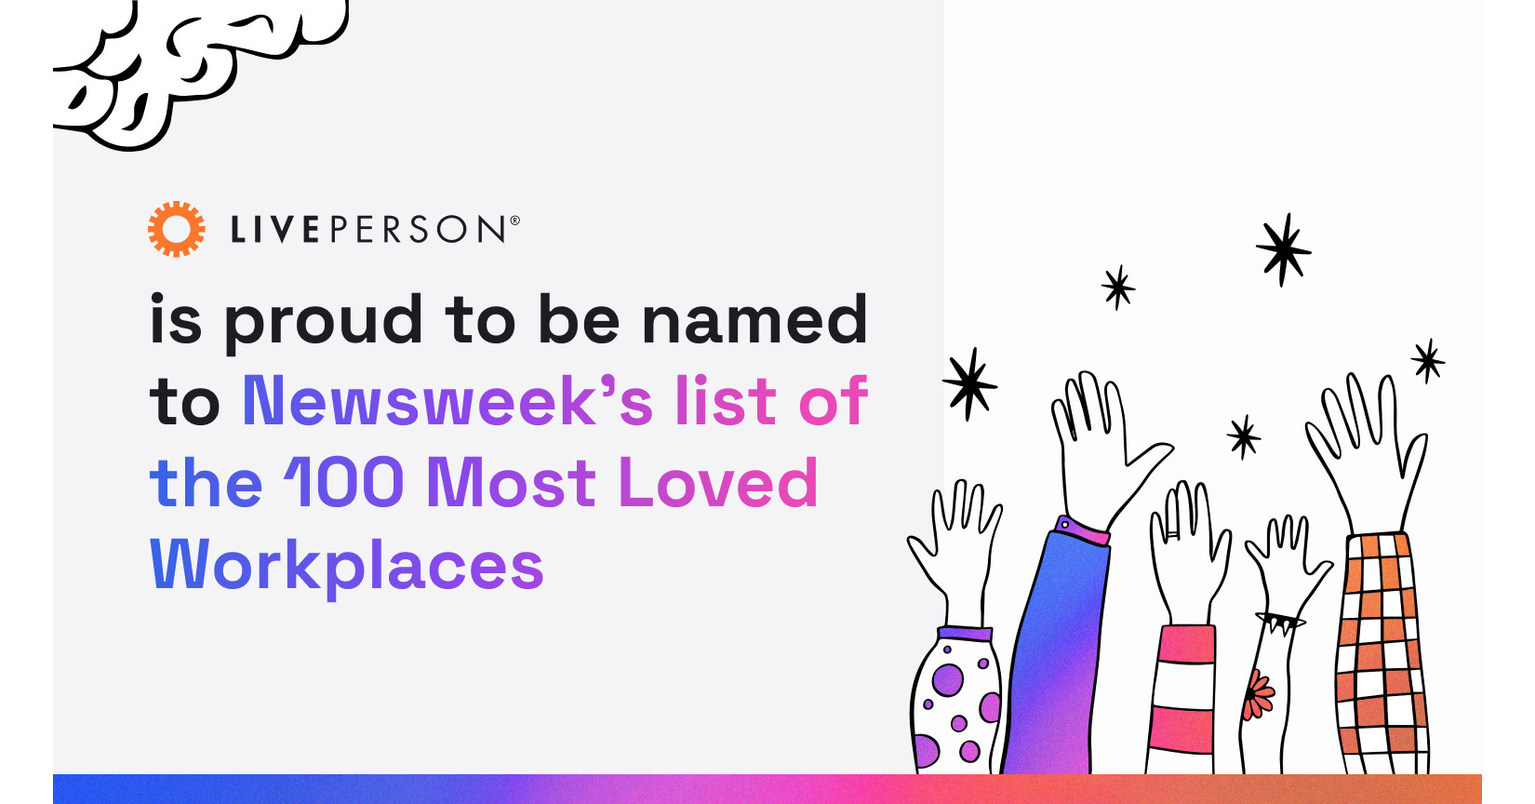 LivePerson named to Newsweek's list of the 100 Most Loved Workplaces for 2022